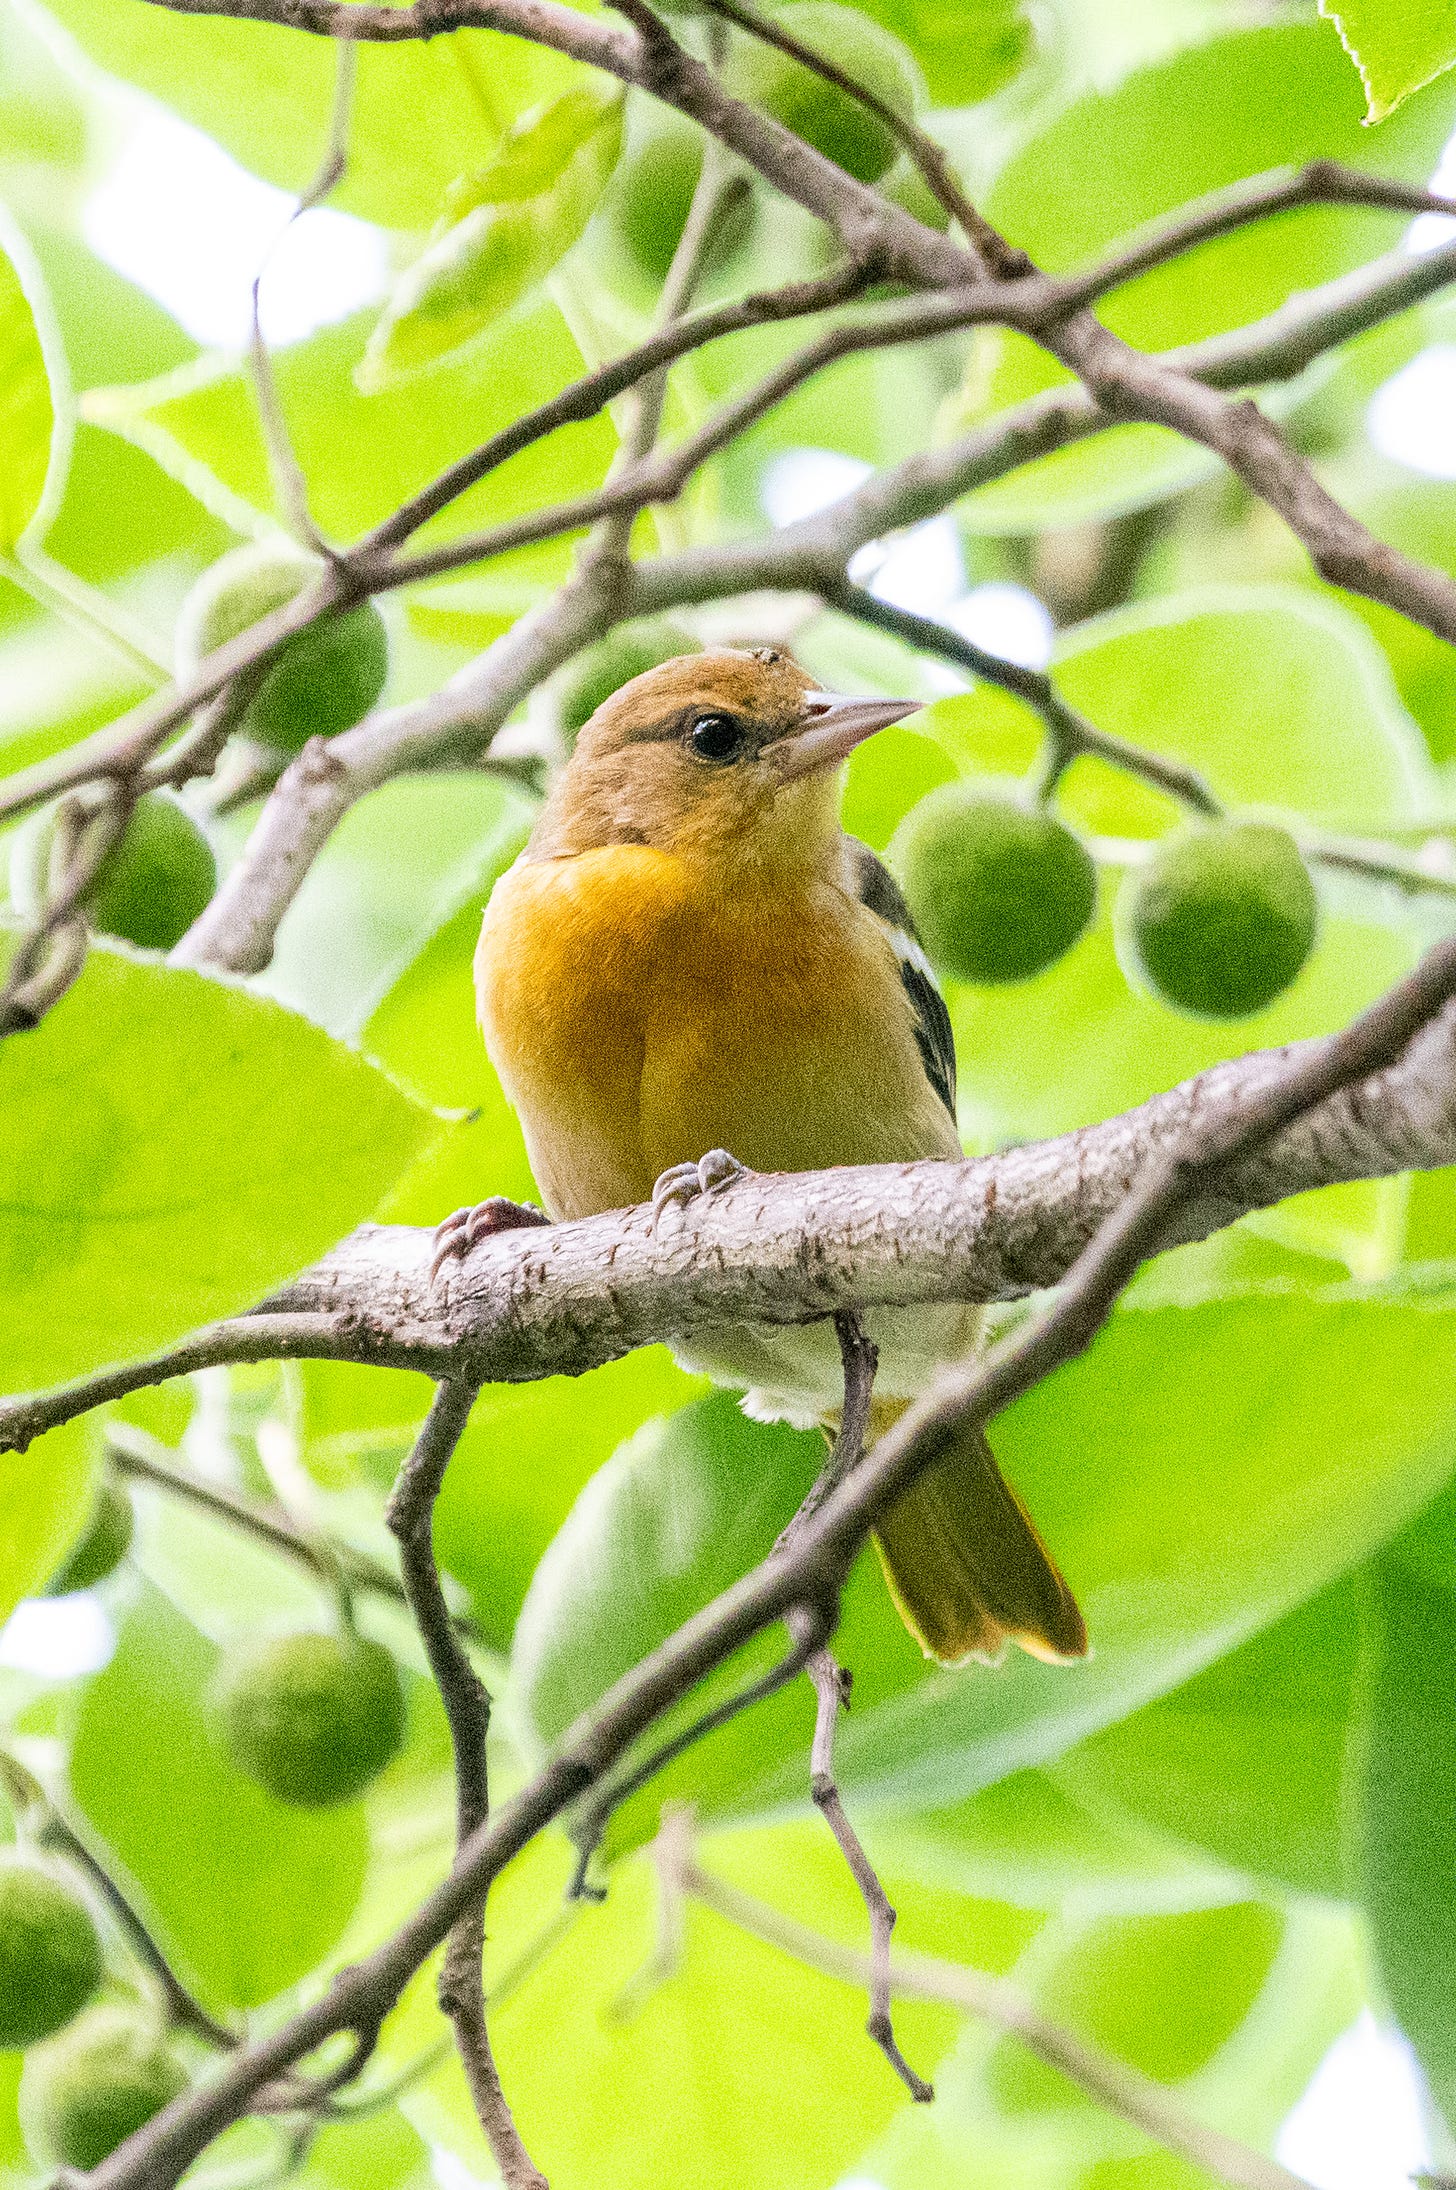 A Baltimore oriole perched amid the unripe fruits of a paper-mulberry